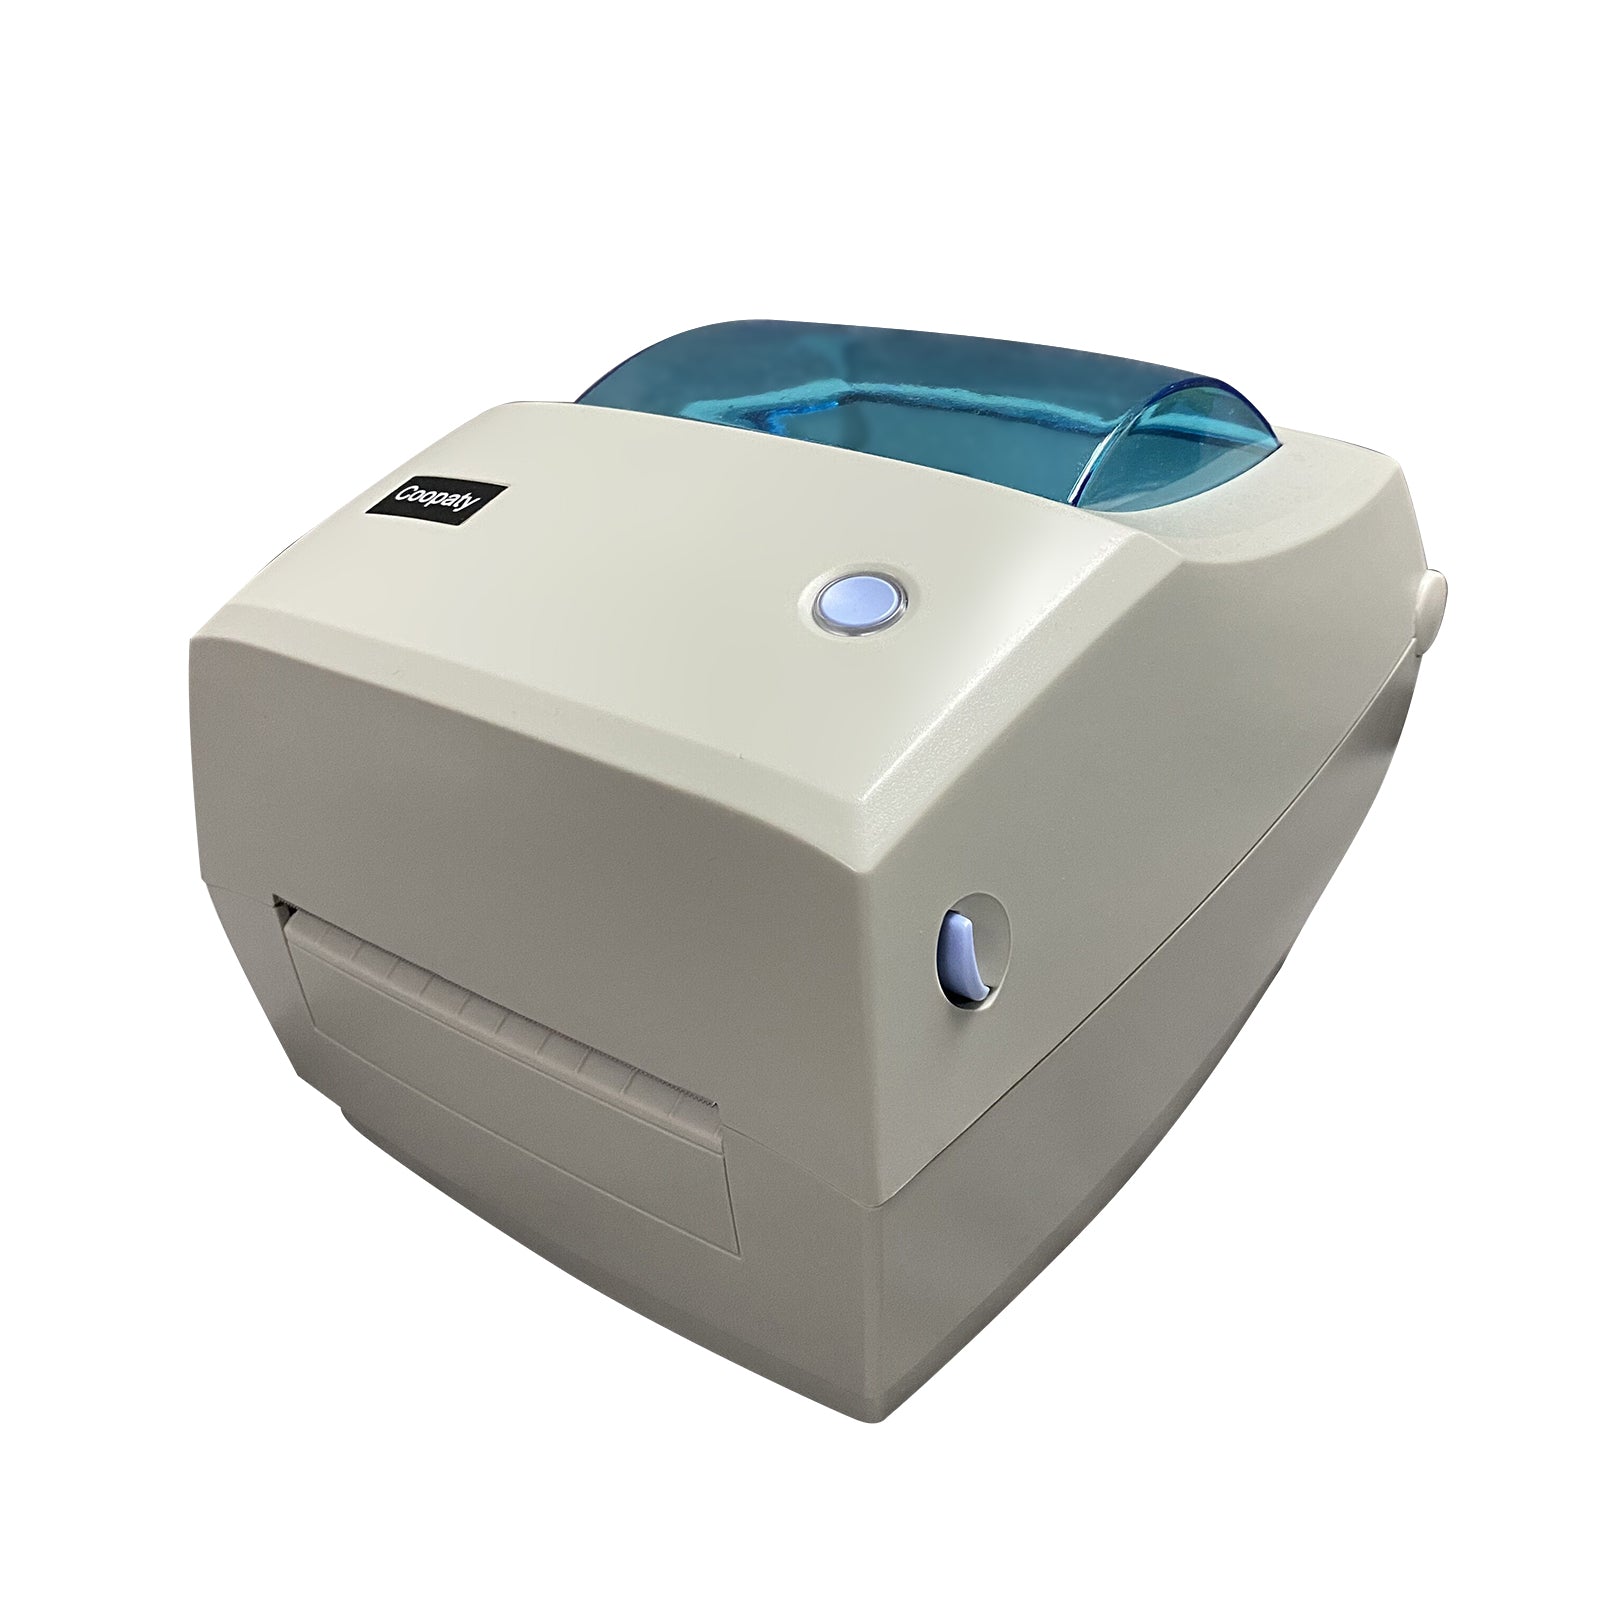 Coopaty Label Printer for Ebay, USPS, High-Speed 4x6 Di